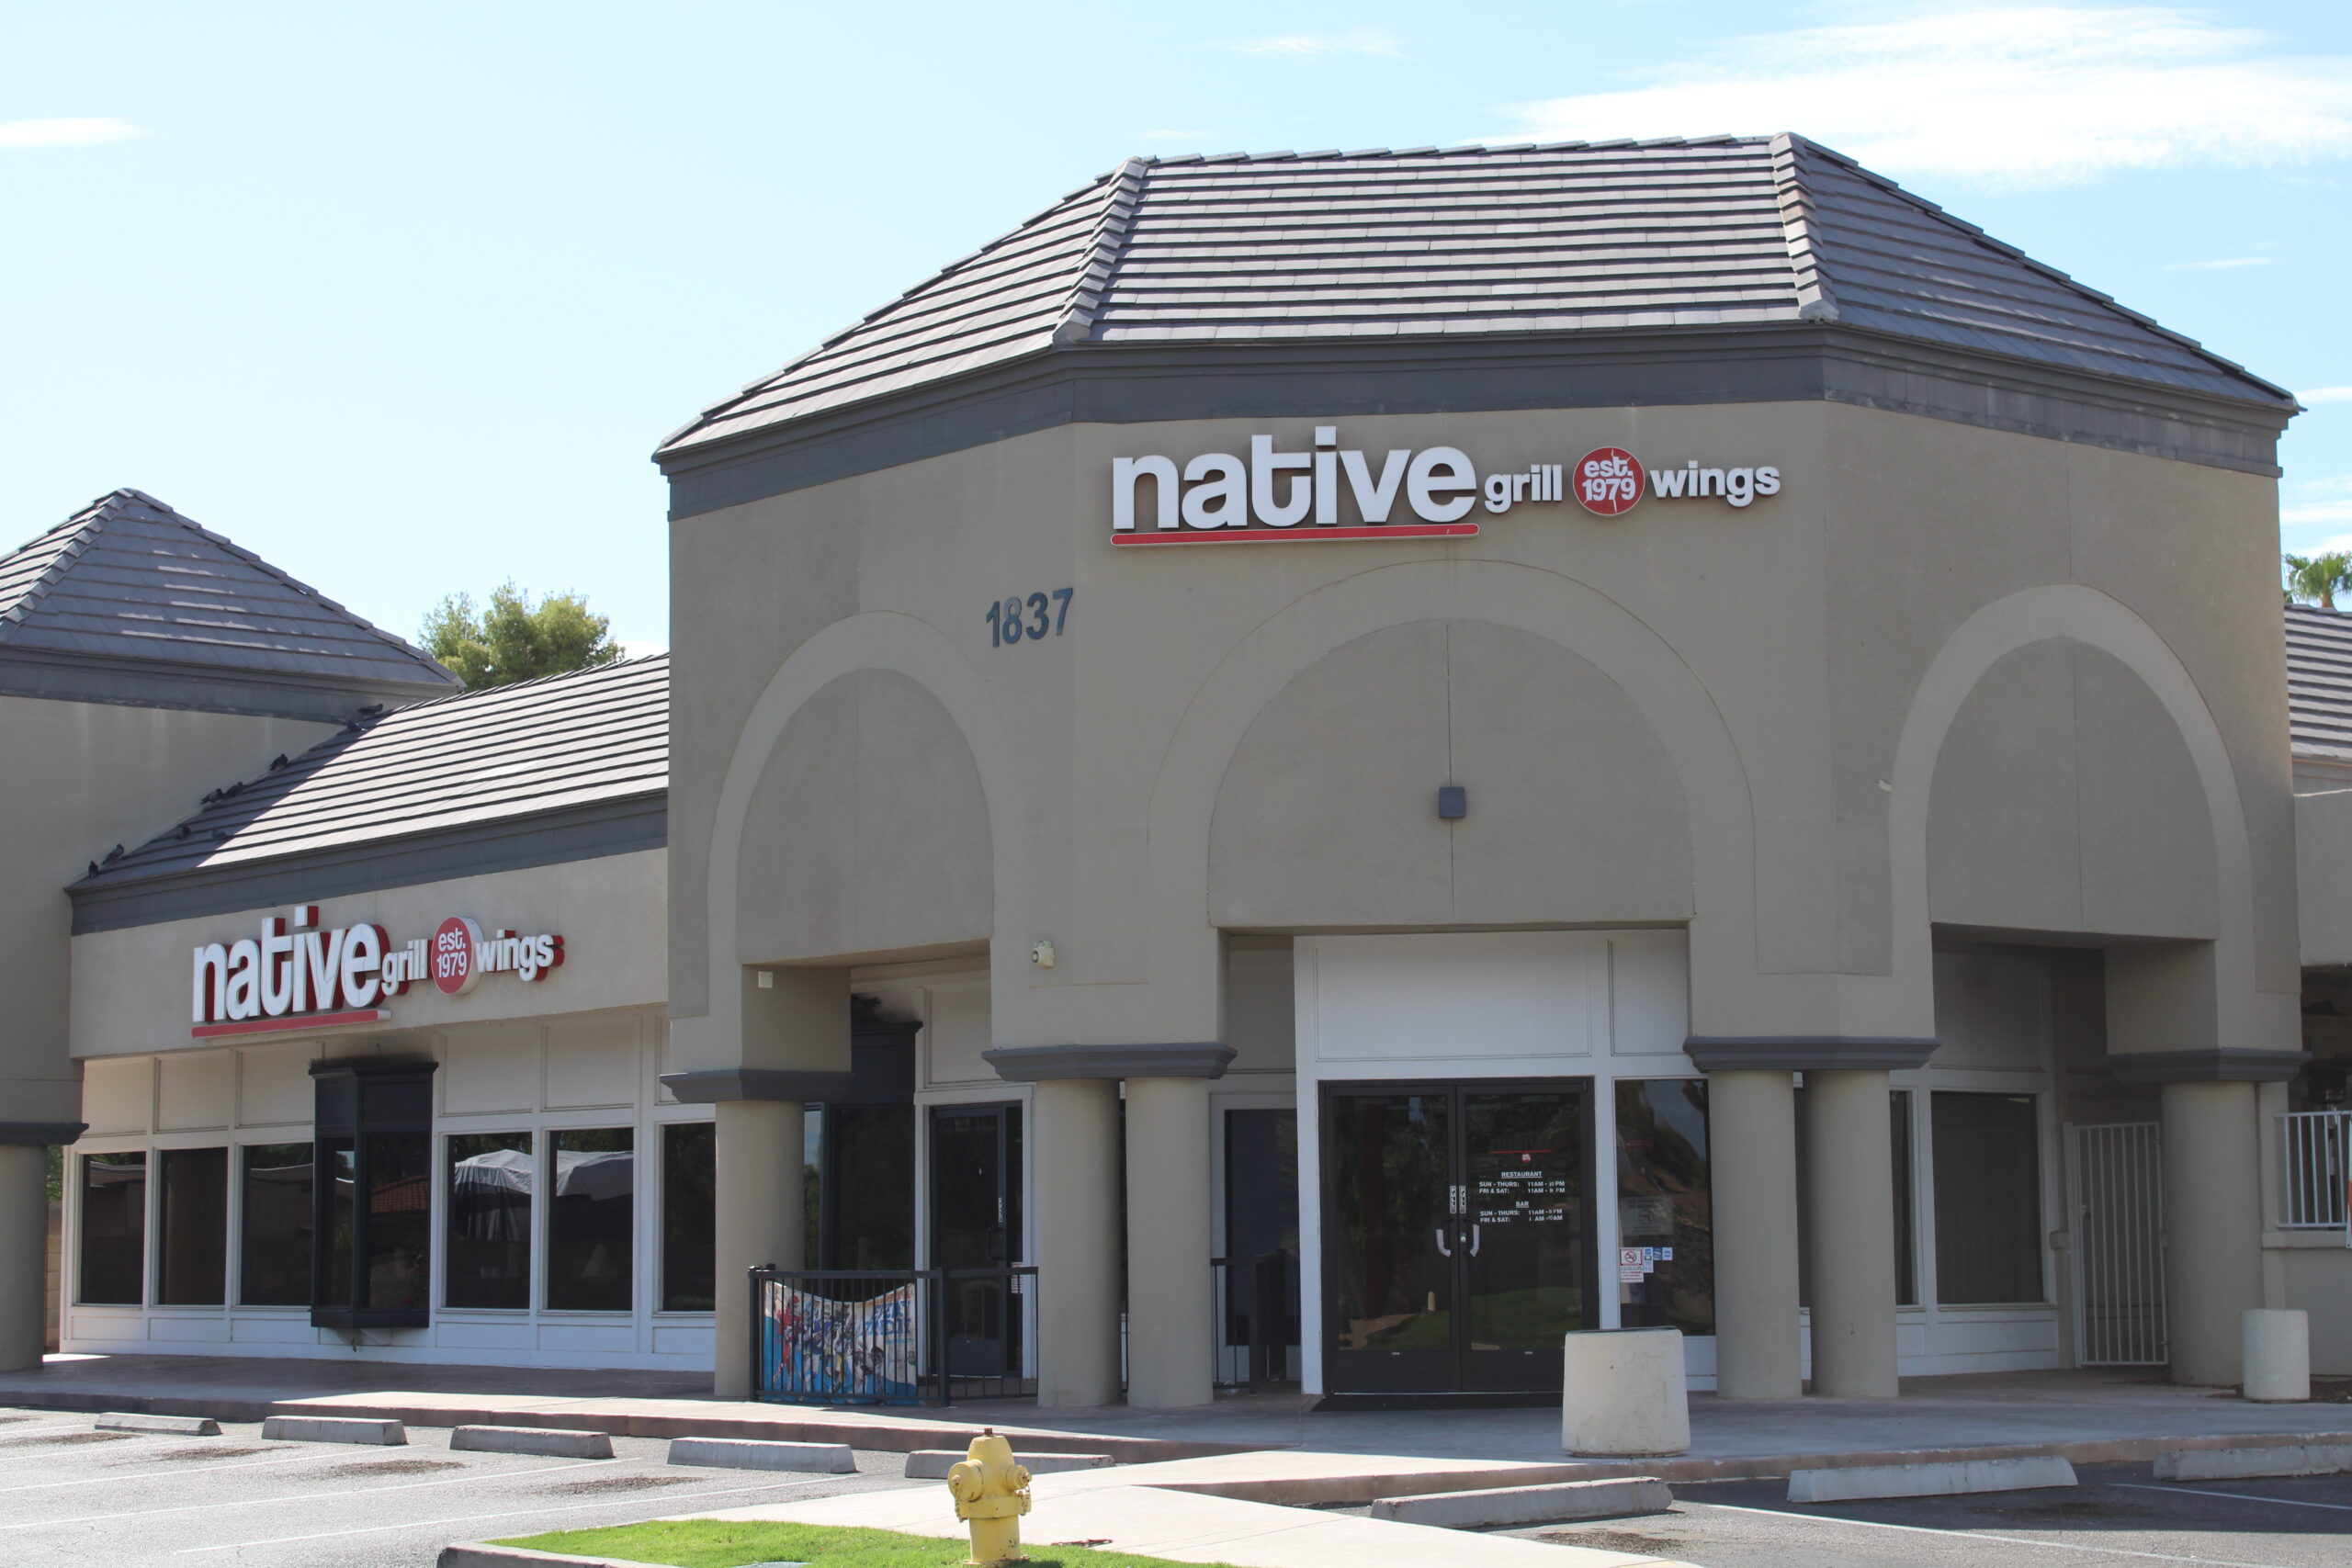 Native Grill & Wings, New Franchise Location